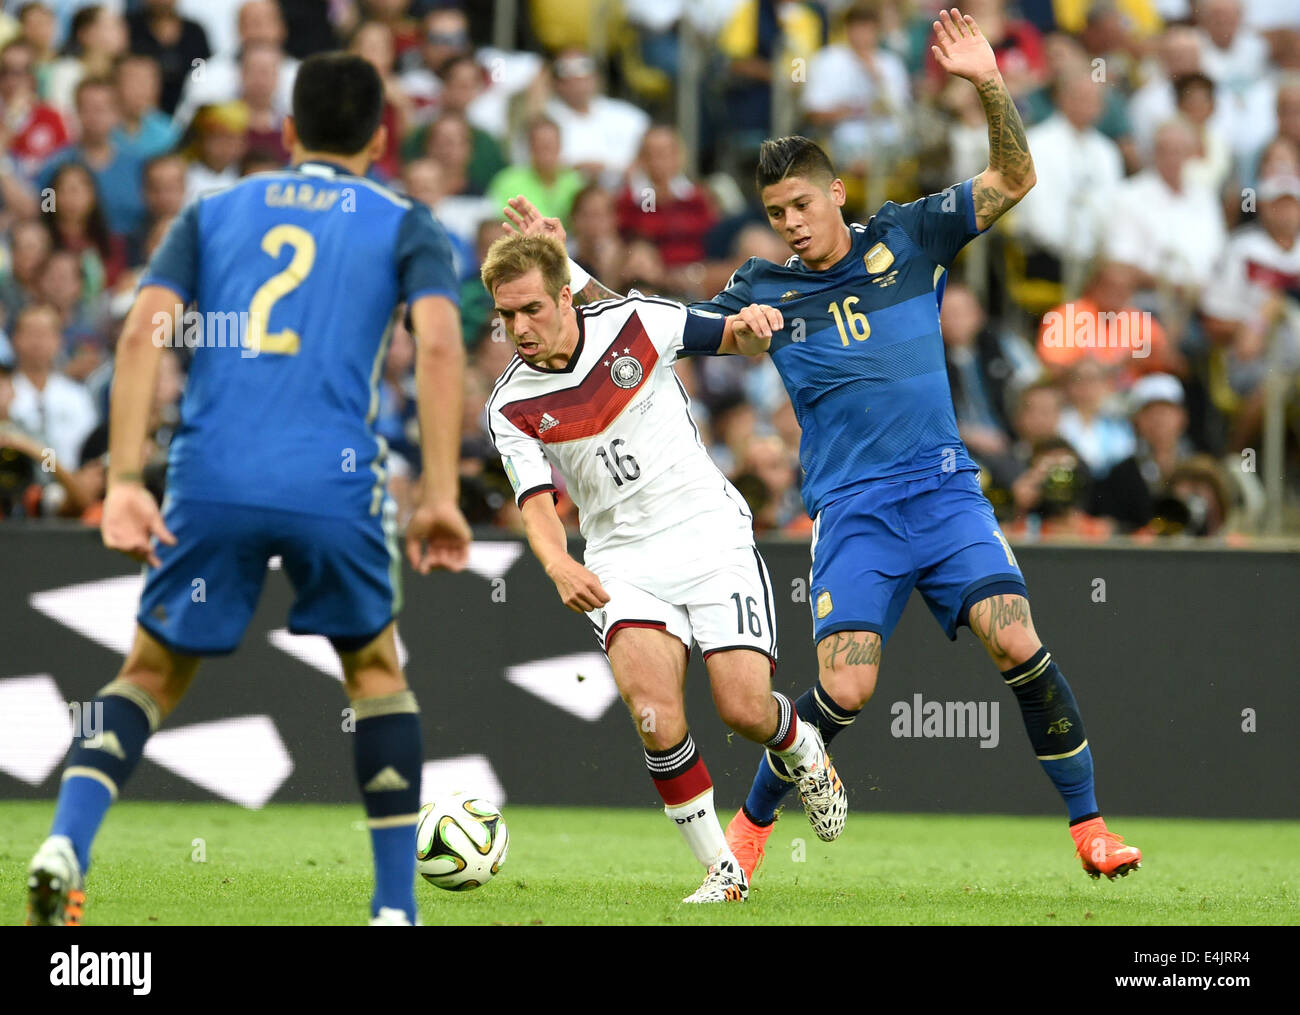 Rio de Janeiro, Brazil. 13th July, 2014. Philipp Lahm (C) of Germany and Ezequiel Garay (L) and Marcos Rojo of Argentina vie for the ball during the FIFA World Cup 2014 final soccer match between Germany and Argentina at the Estadio do Maracana in Rio de Janeiro, Brazil, 13 July 2014. Photo: Andreas Gebert/dpa/Alamy Live News Stock Photo